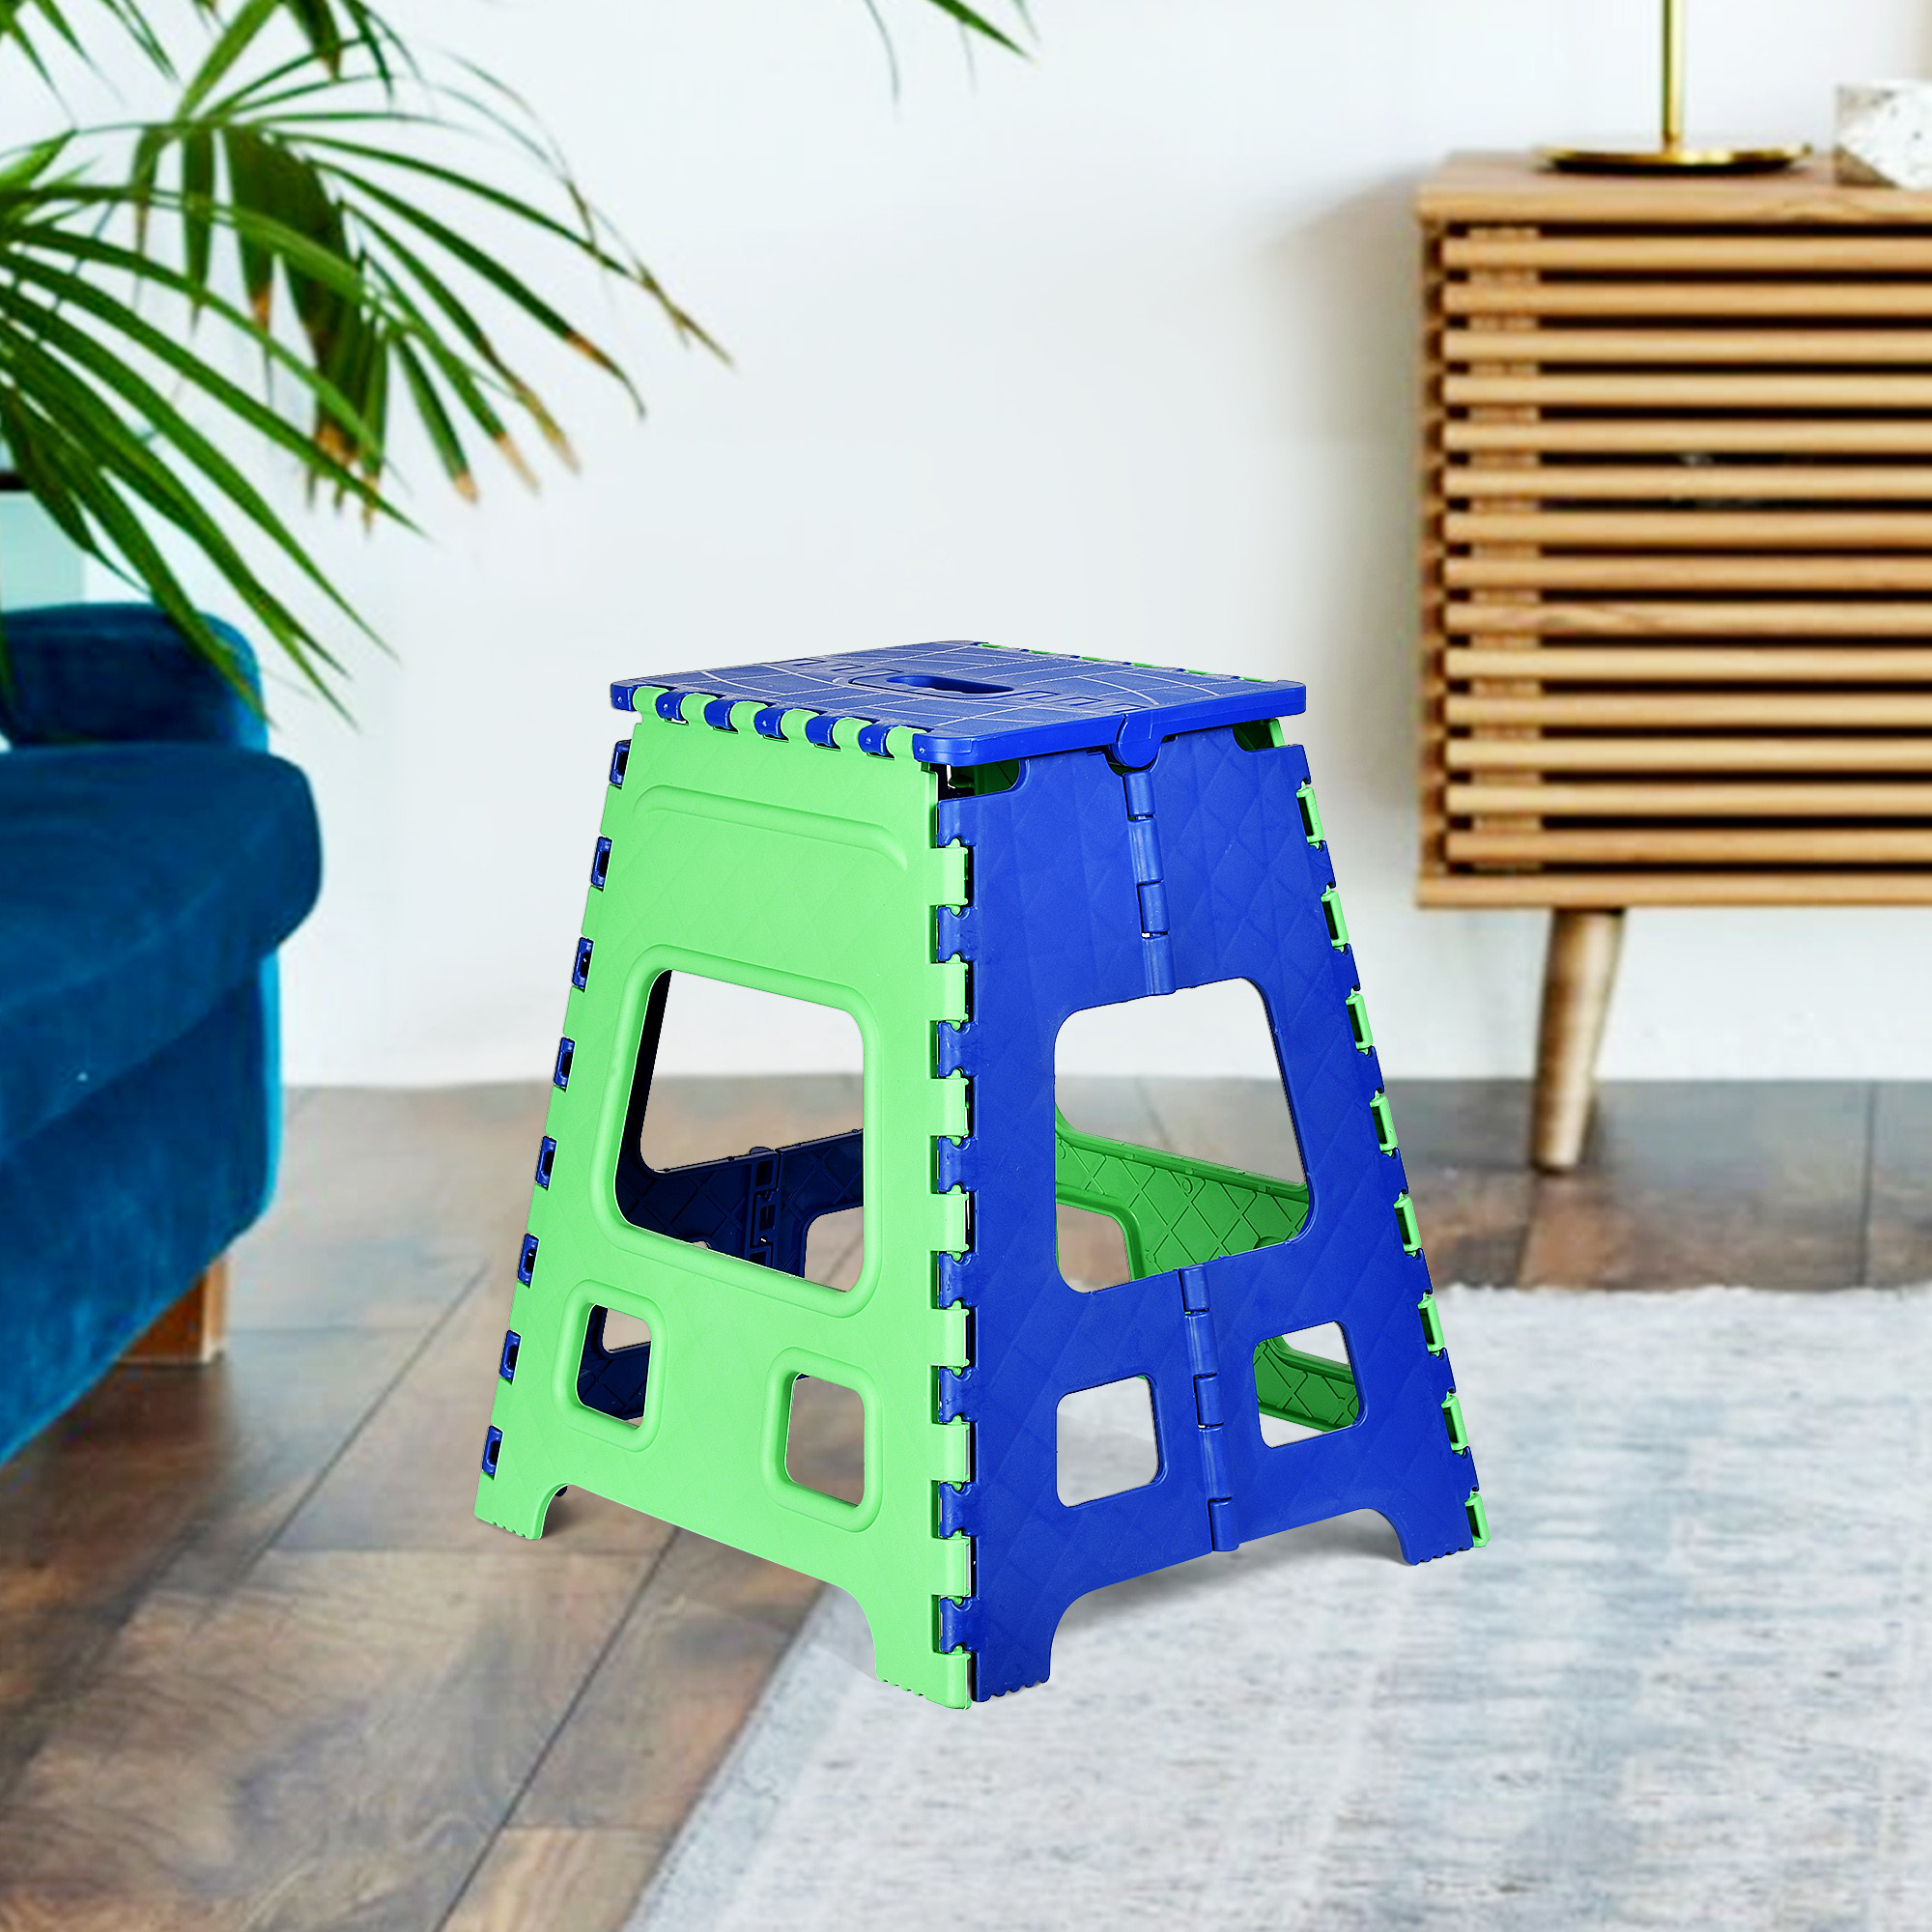 Kuber Industries Stool | Foldable Stool | Collapsible Camping Chair | Stool for Outdoor-Fishing-Hiking-Gardening-Travel | Portable Stool | Multipurpose Sitting Stool | Large | Green & Blue